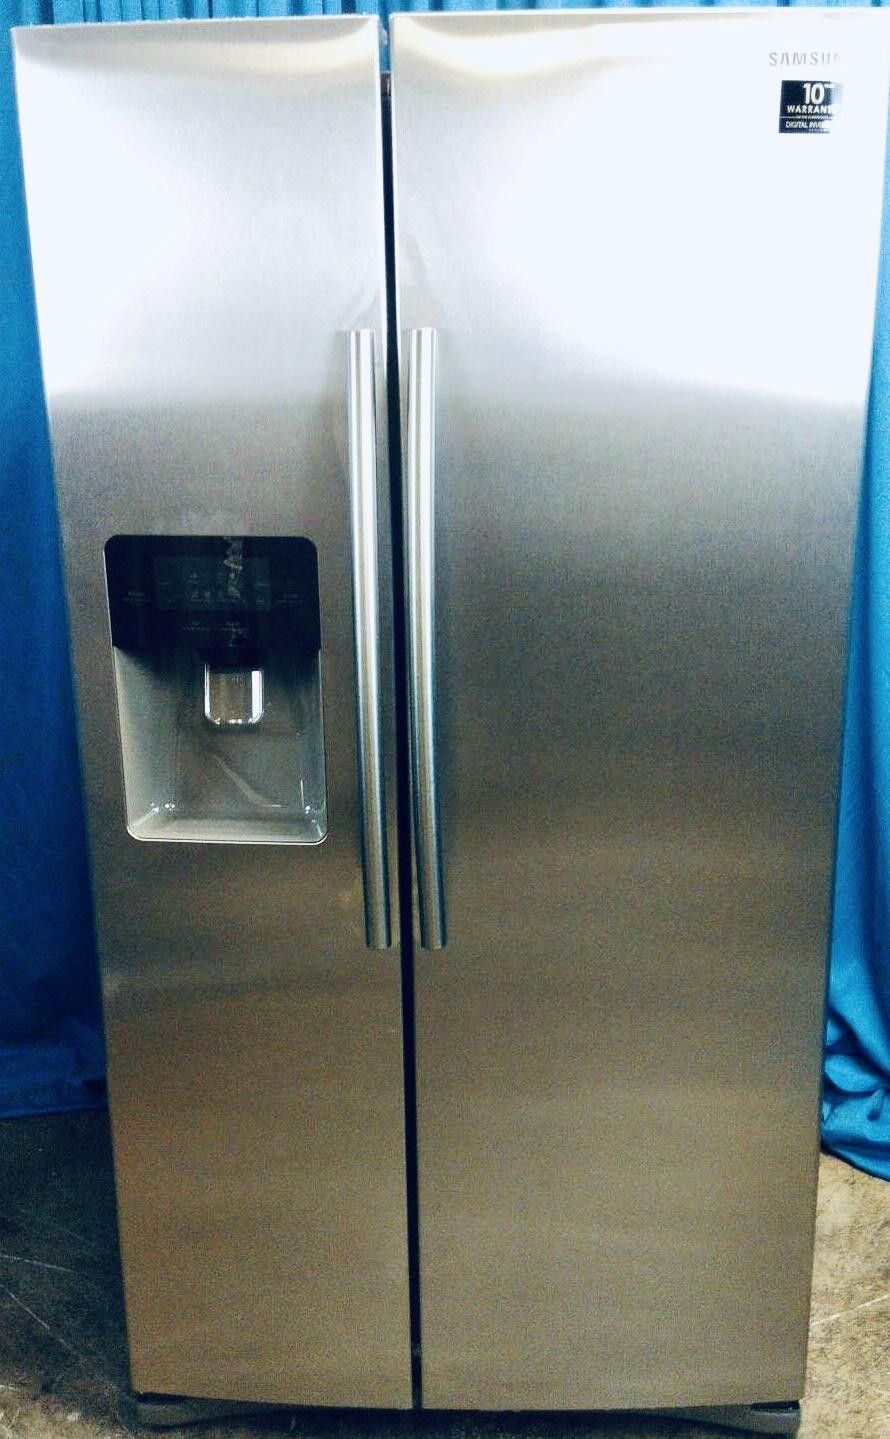 Samsung Side by Side Refrigerator (Stainless Steel)-PRICE IS FIRM